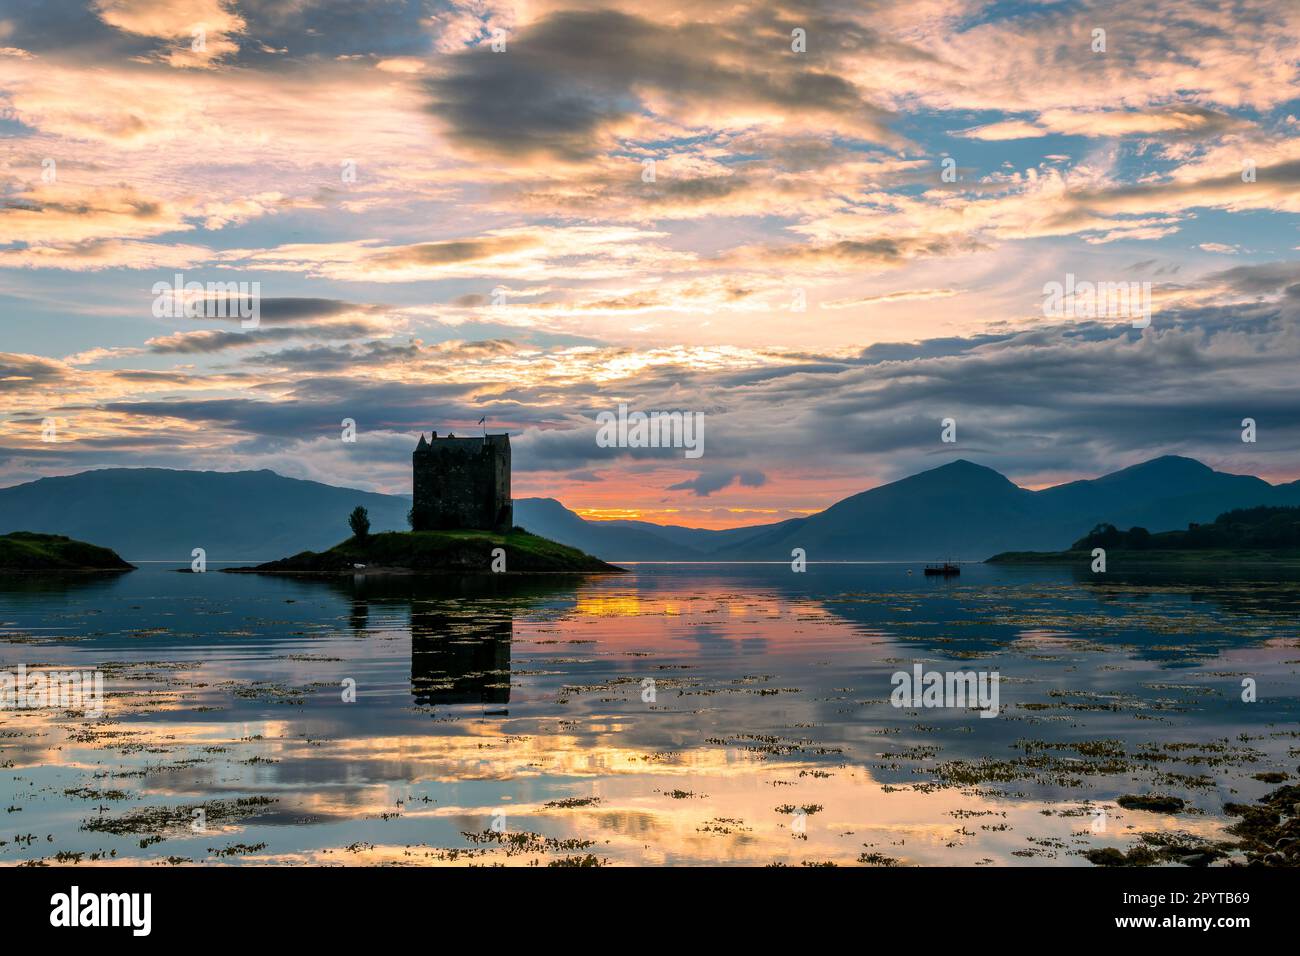 Castle Stalker on Loch Laich with water reflections at sunset, Argyll, Scotland UK Stock Photo